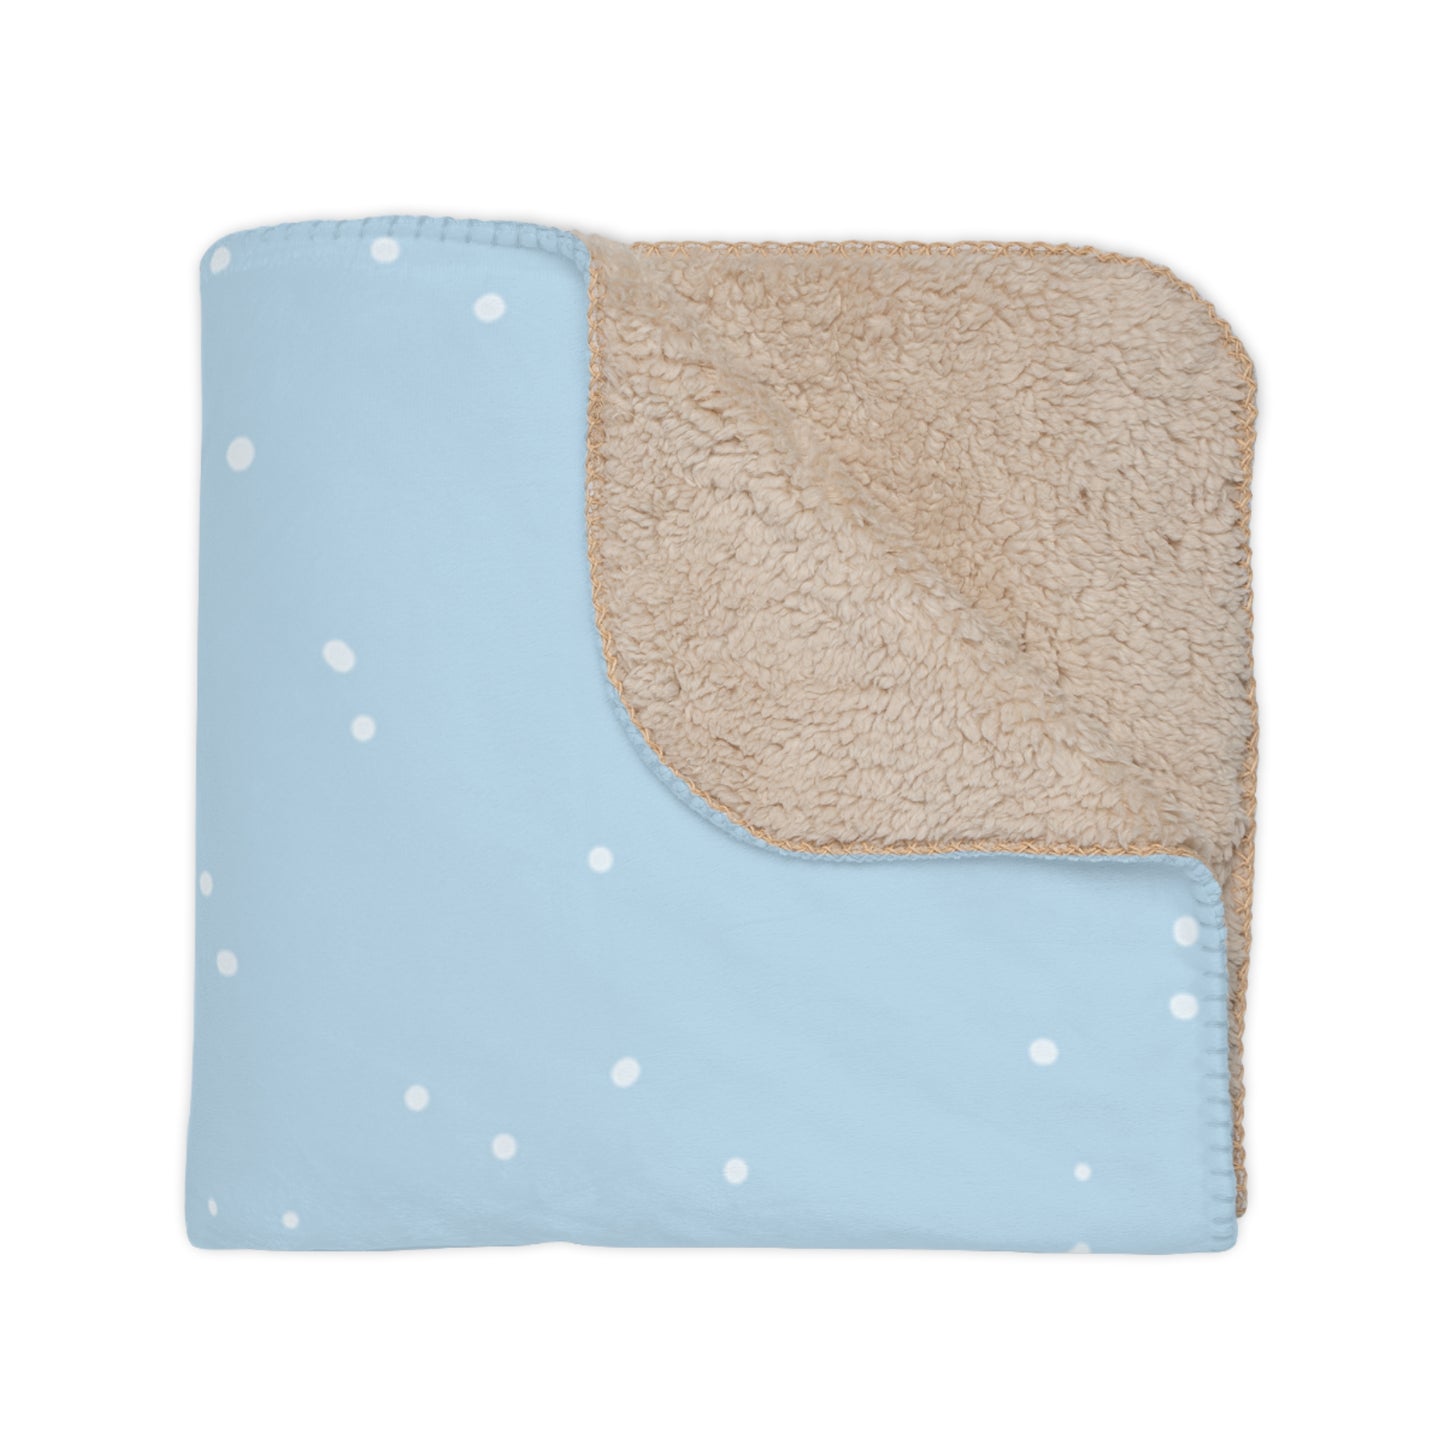 Merry Christmas with Trees Printed Sherpa Blanket, Sky Blue